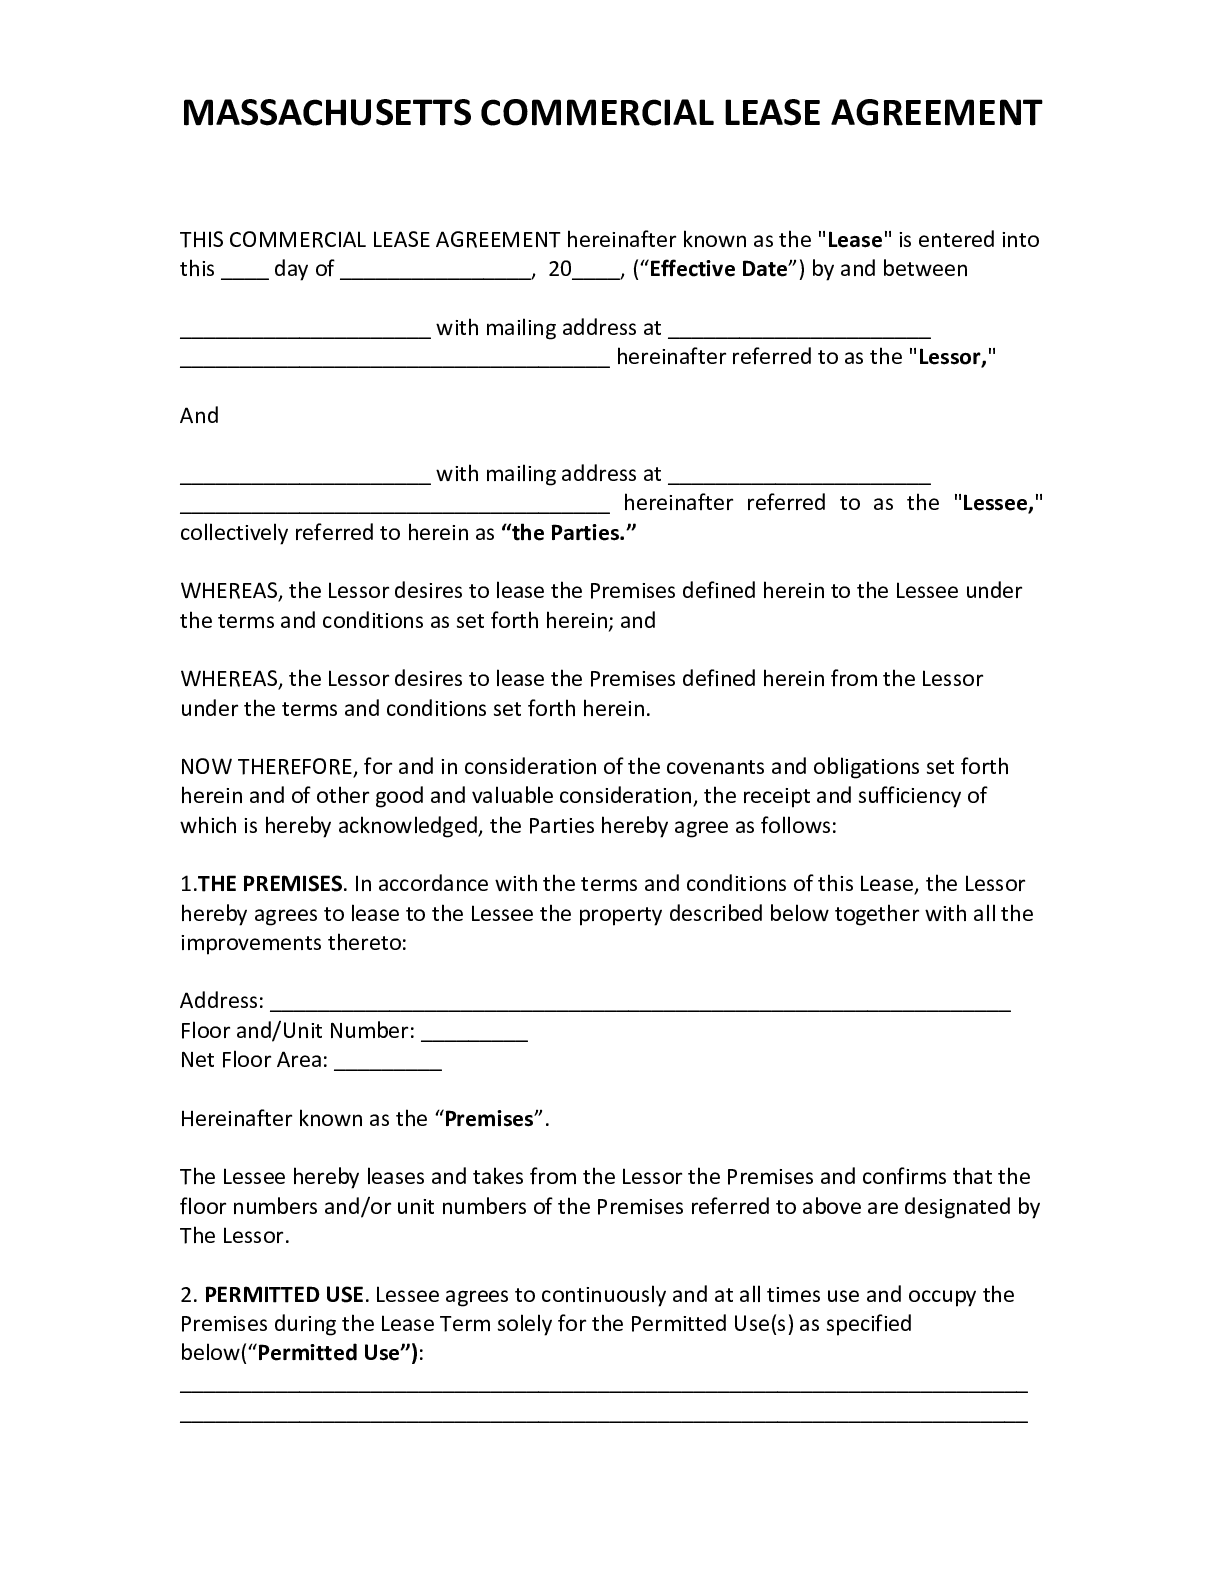 official-massachusetts-commercial-lease-agreement-2020-pdf-form